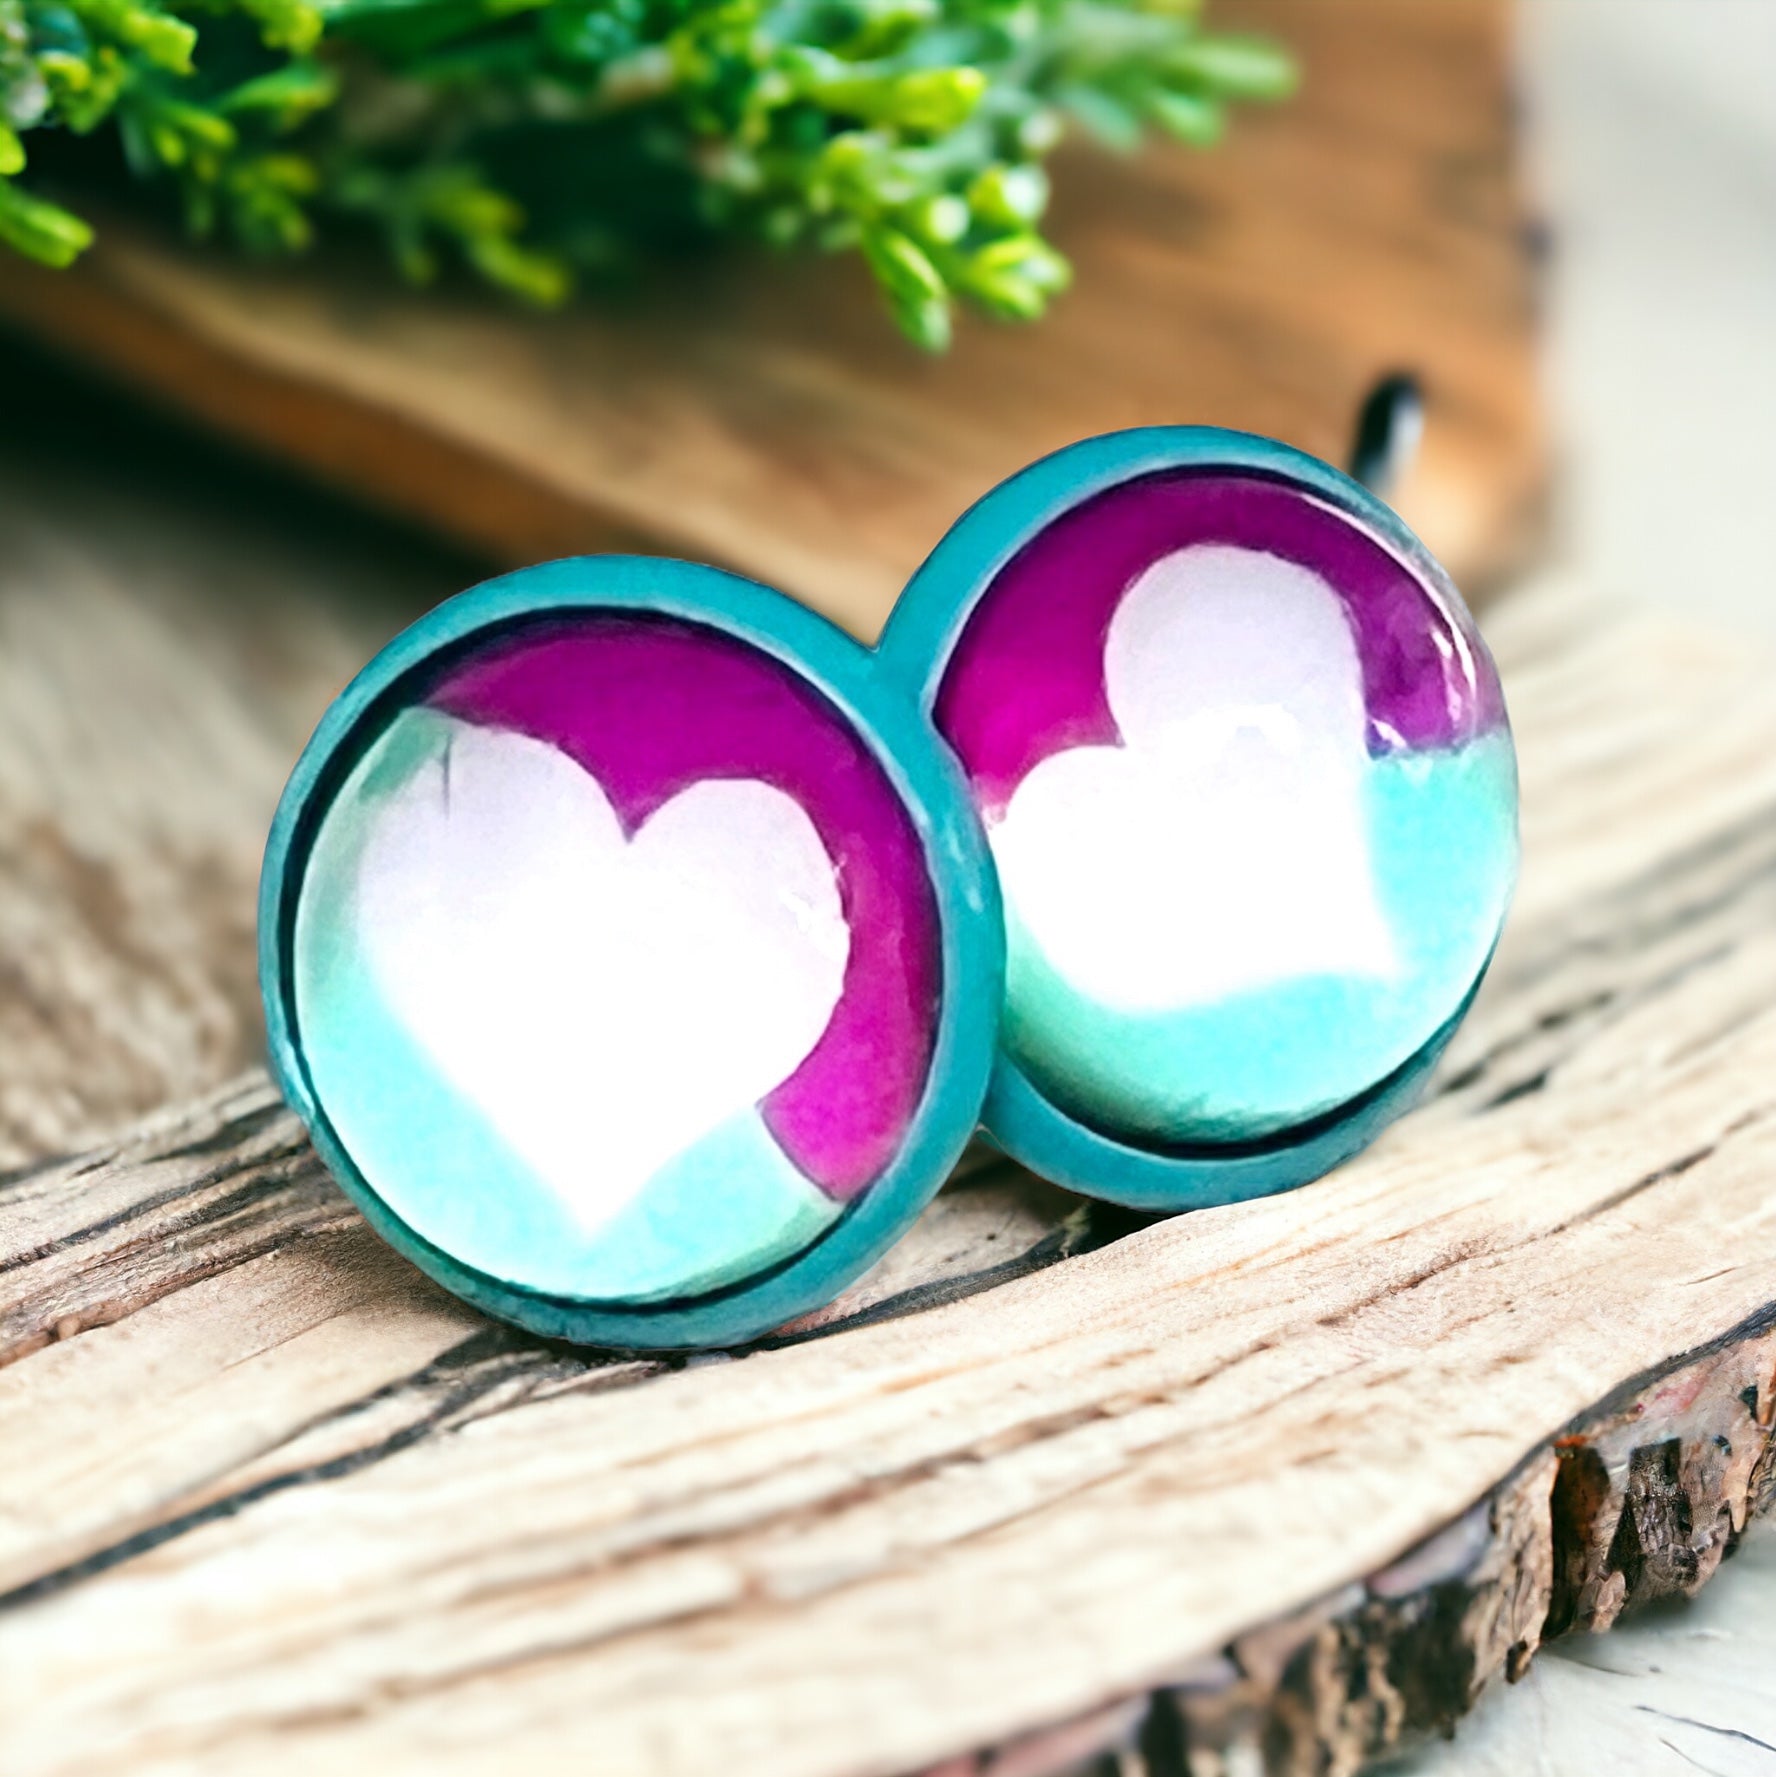 White Heart Blue & Purple Stud Earrings: Charming Accents for a Pop of Color